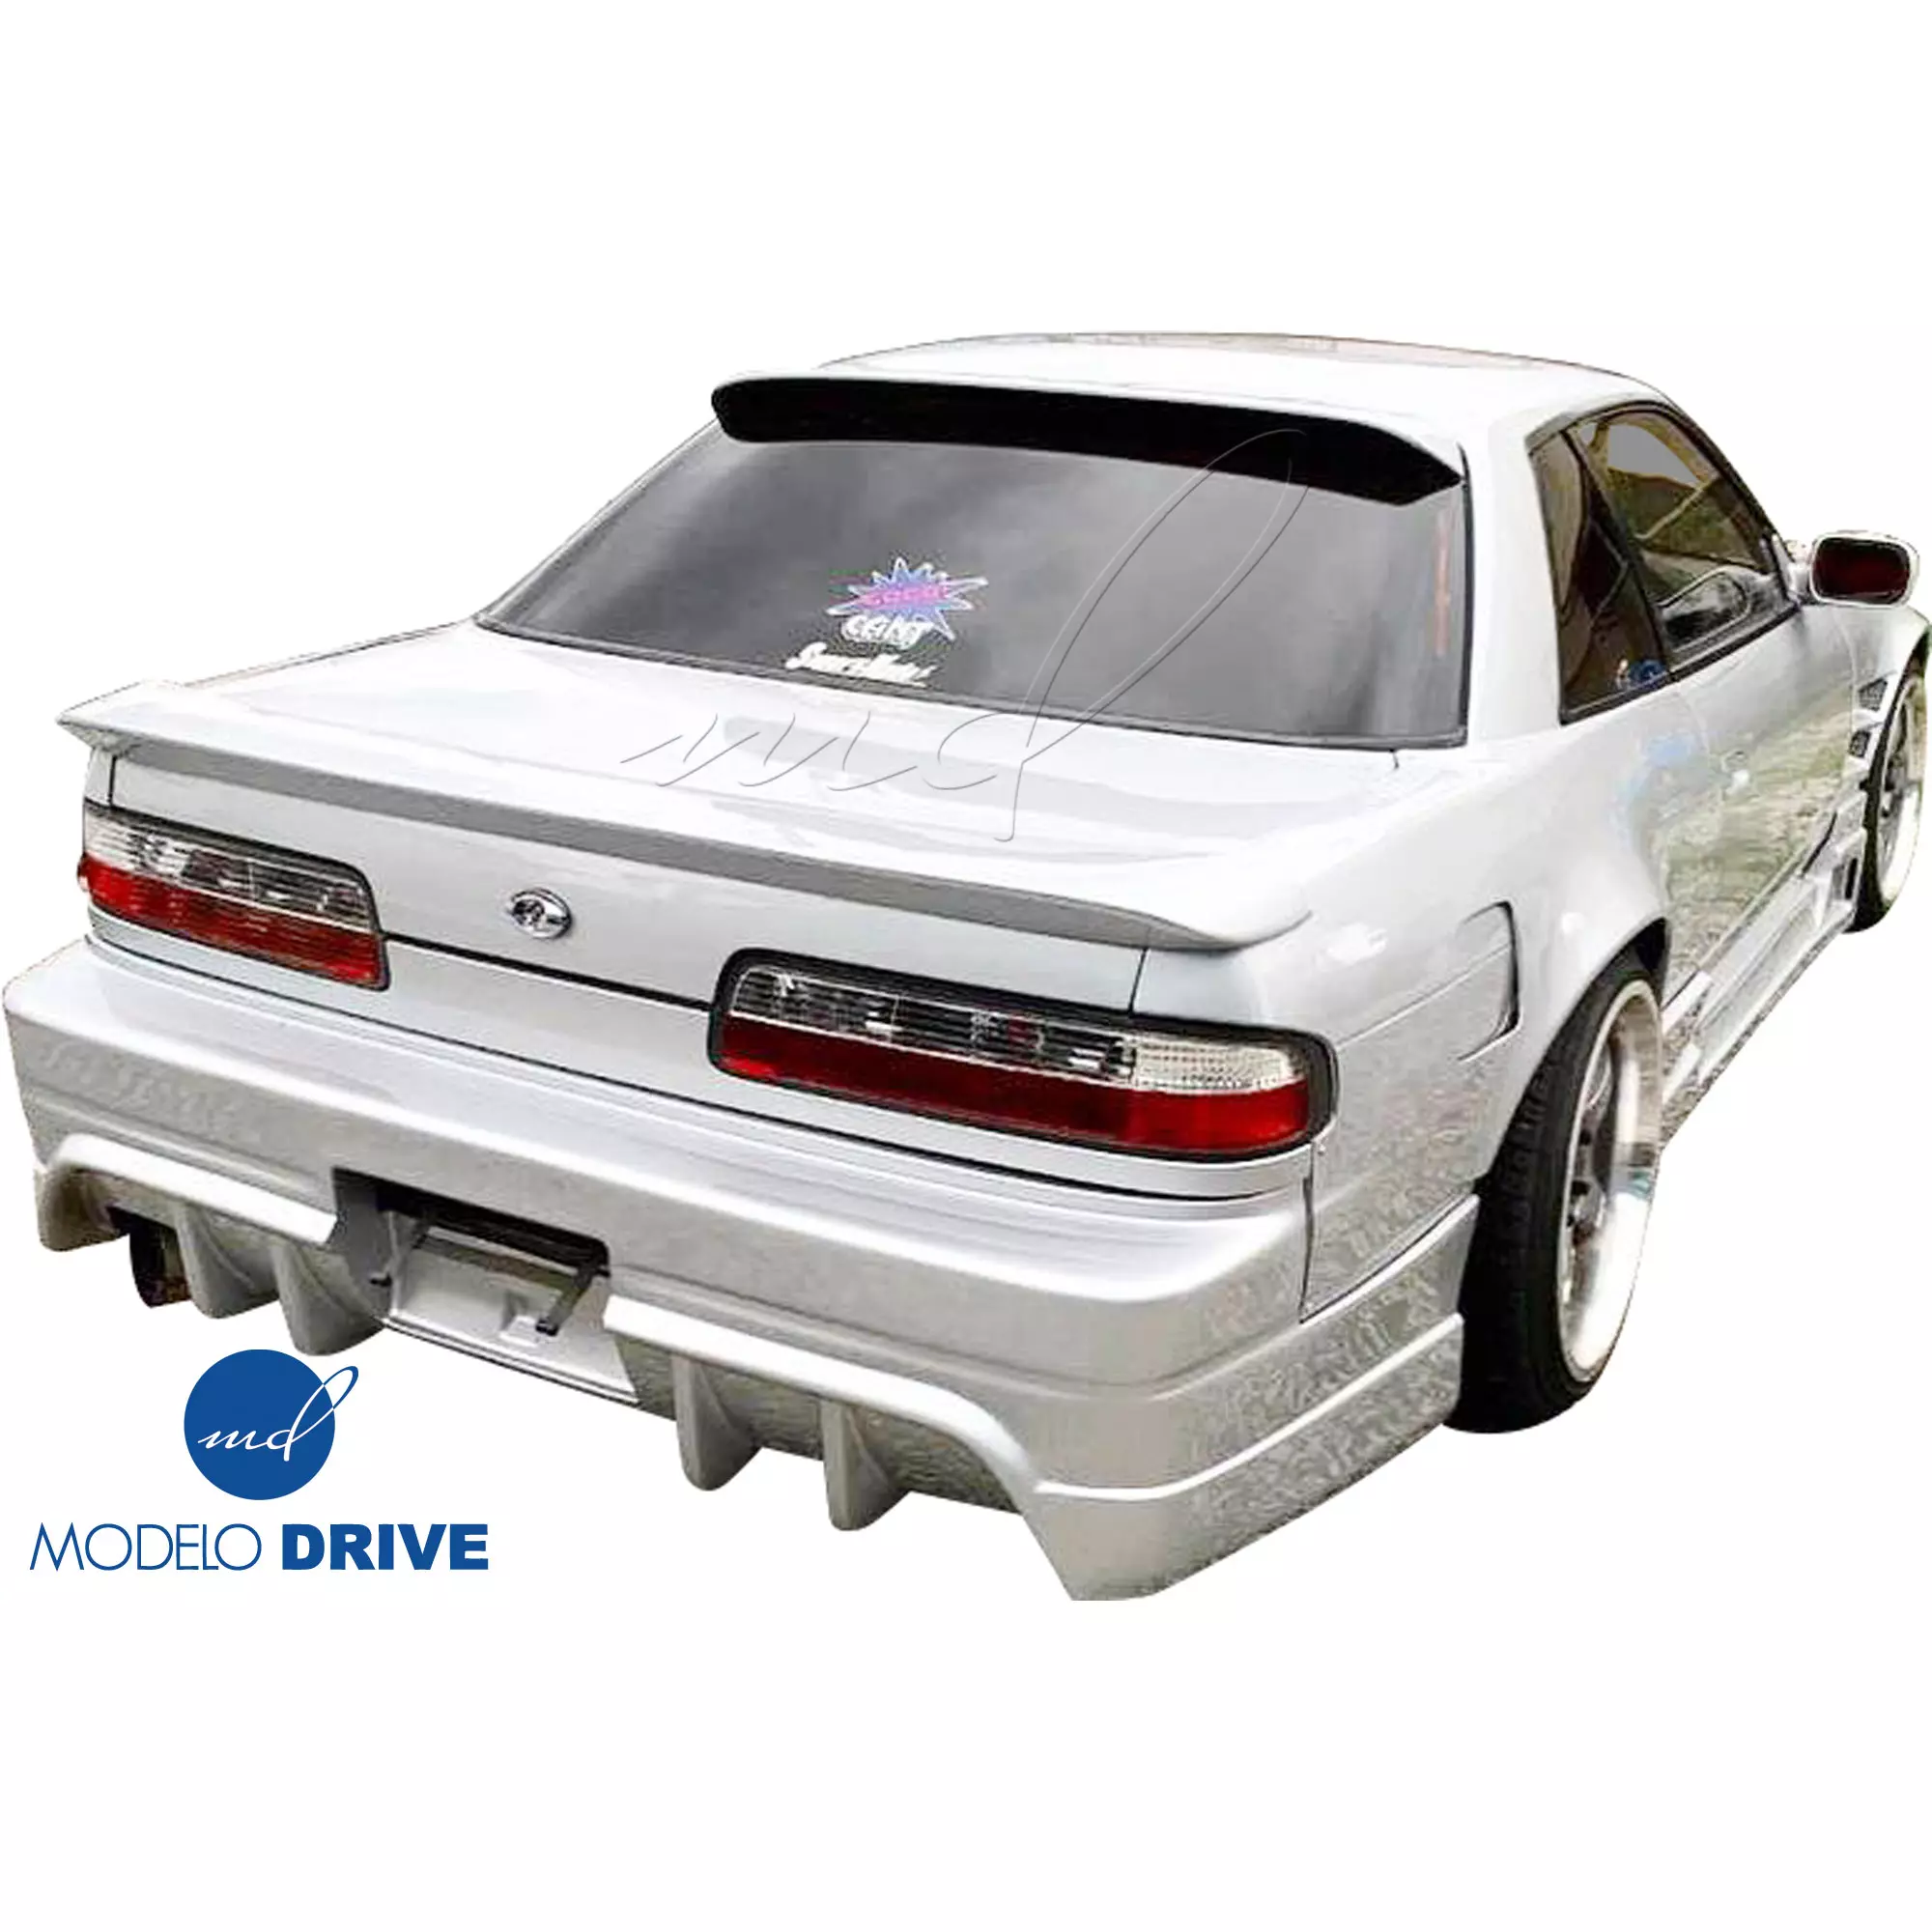 ModeloDrive FRP DMA Trunk Spoiler Wing > Nissan 240SX 1989-1994 > 2dr Coupe - Image 8